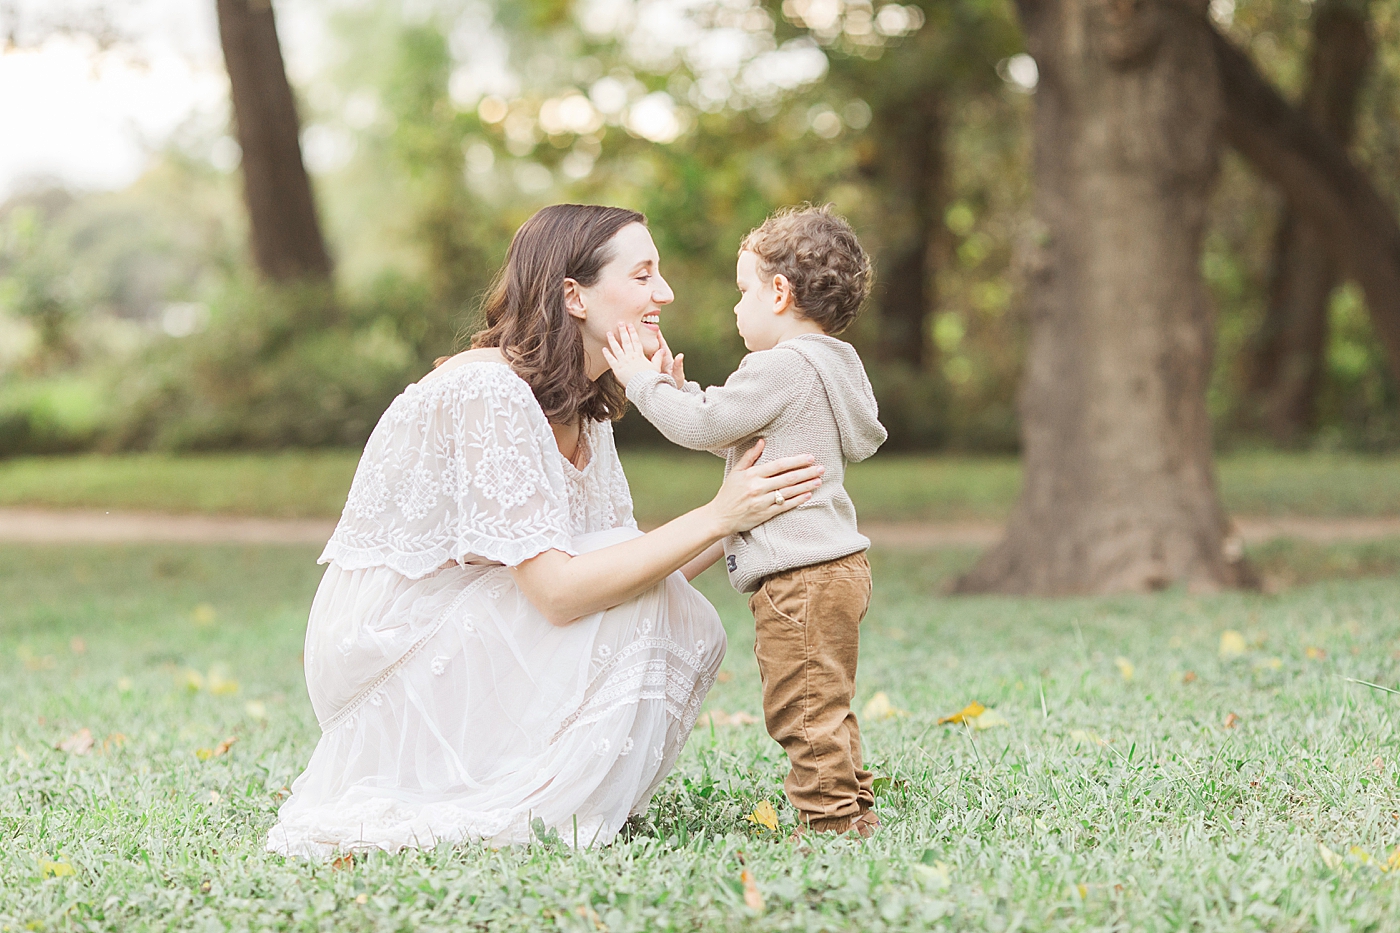 Moment between a mom and her son during a family photoshoot with Fresh Light Photography.